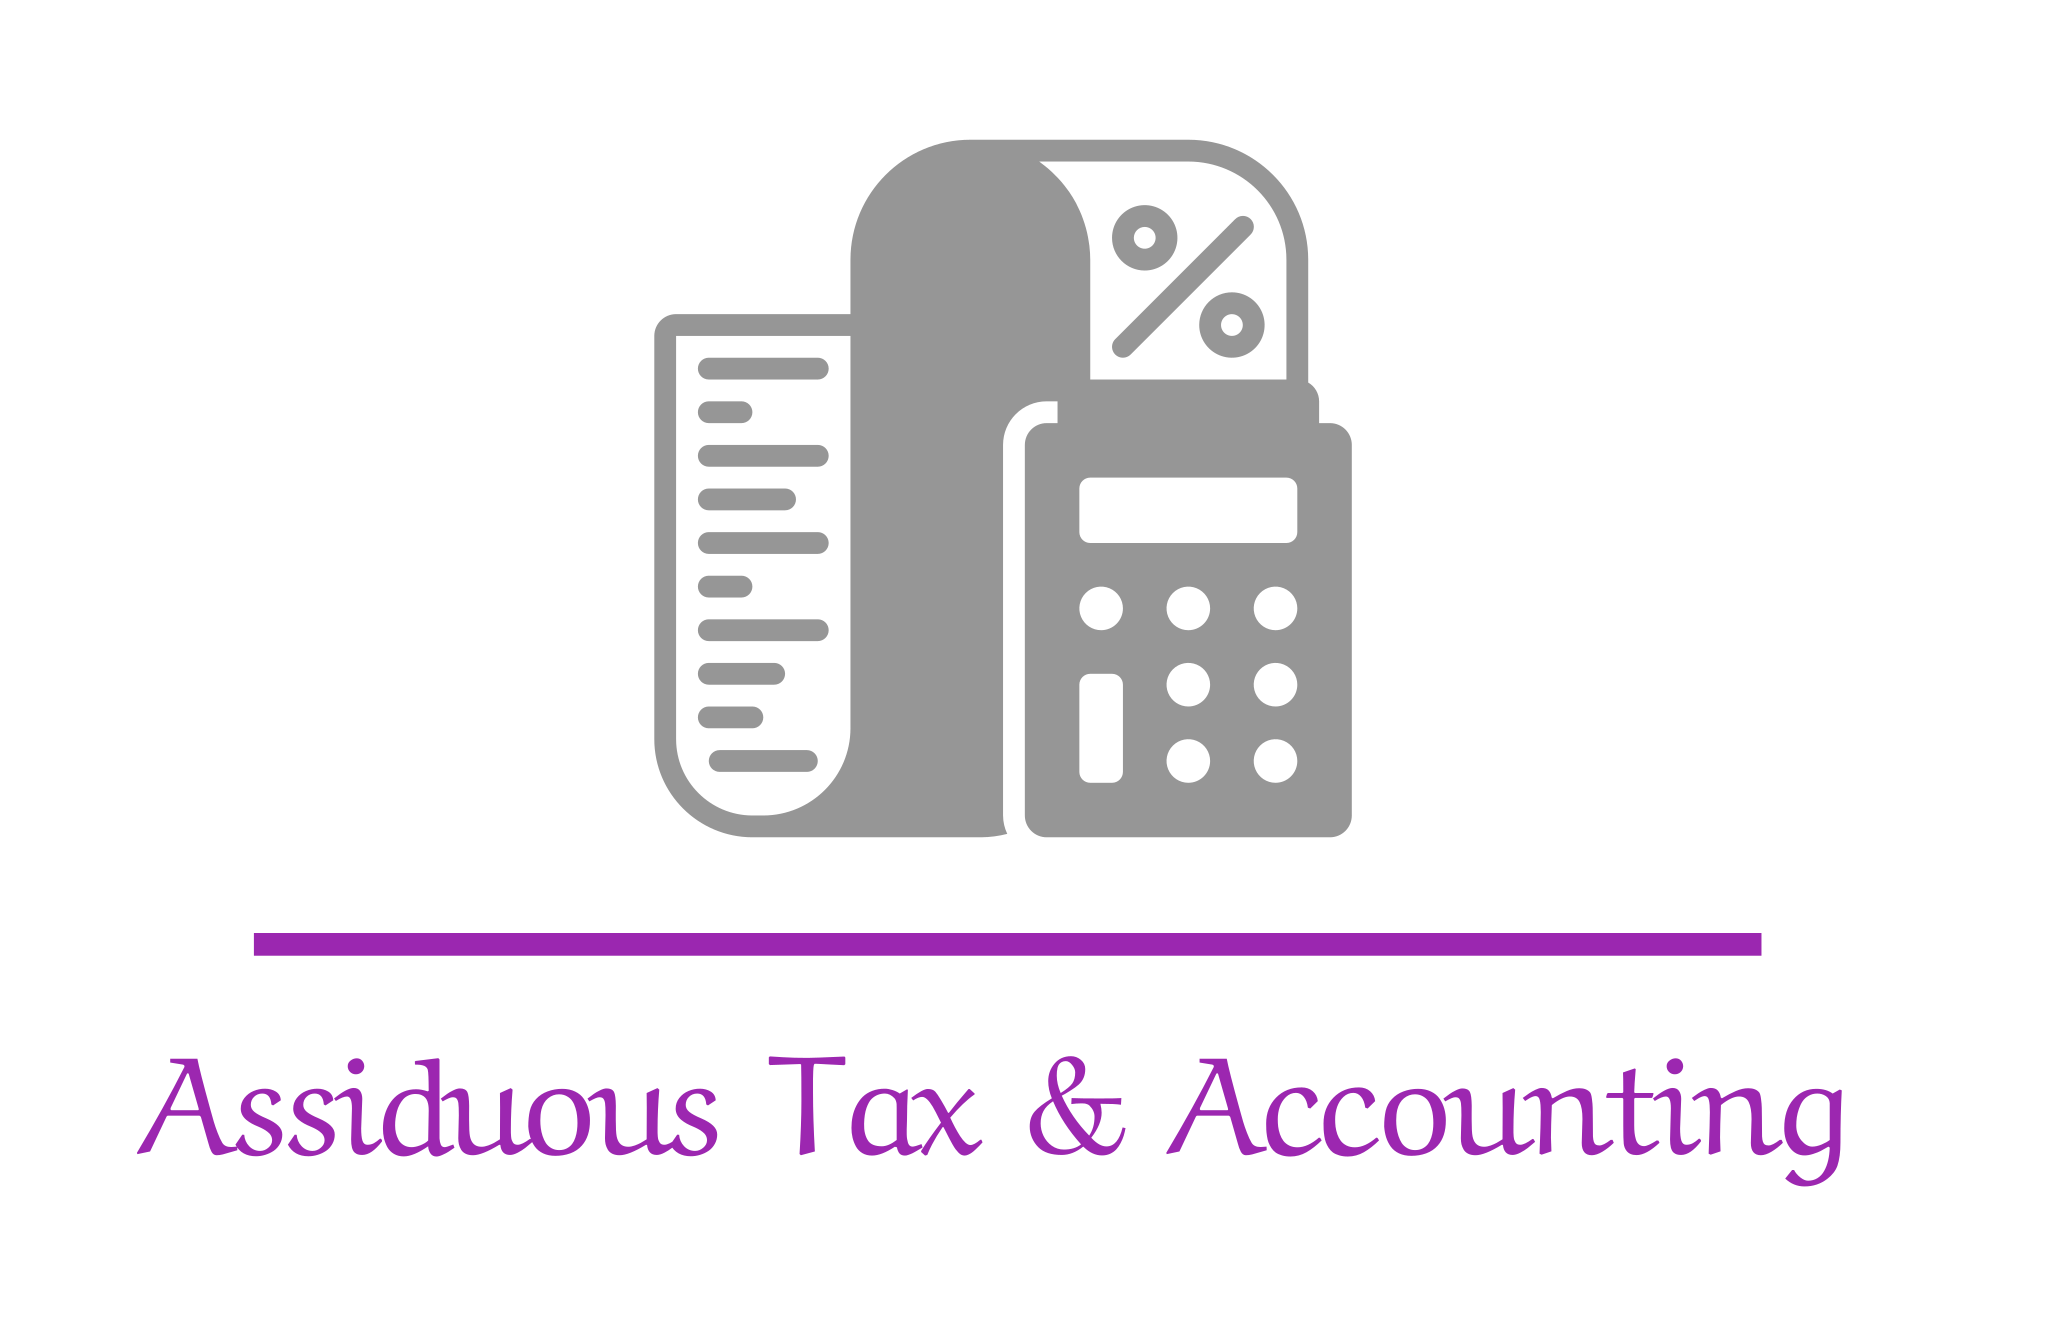 INCOME TAX RETURN - OUR SERVICES